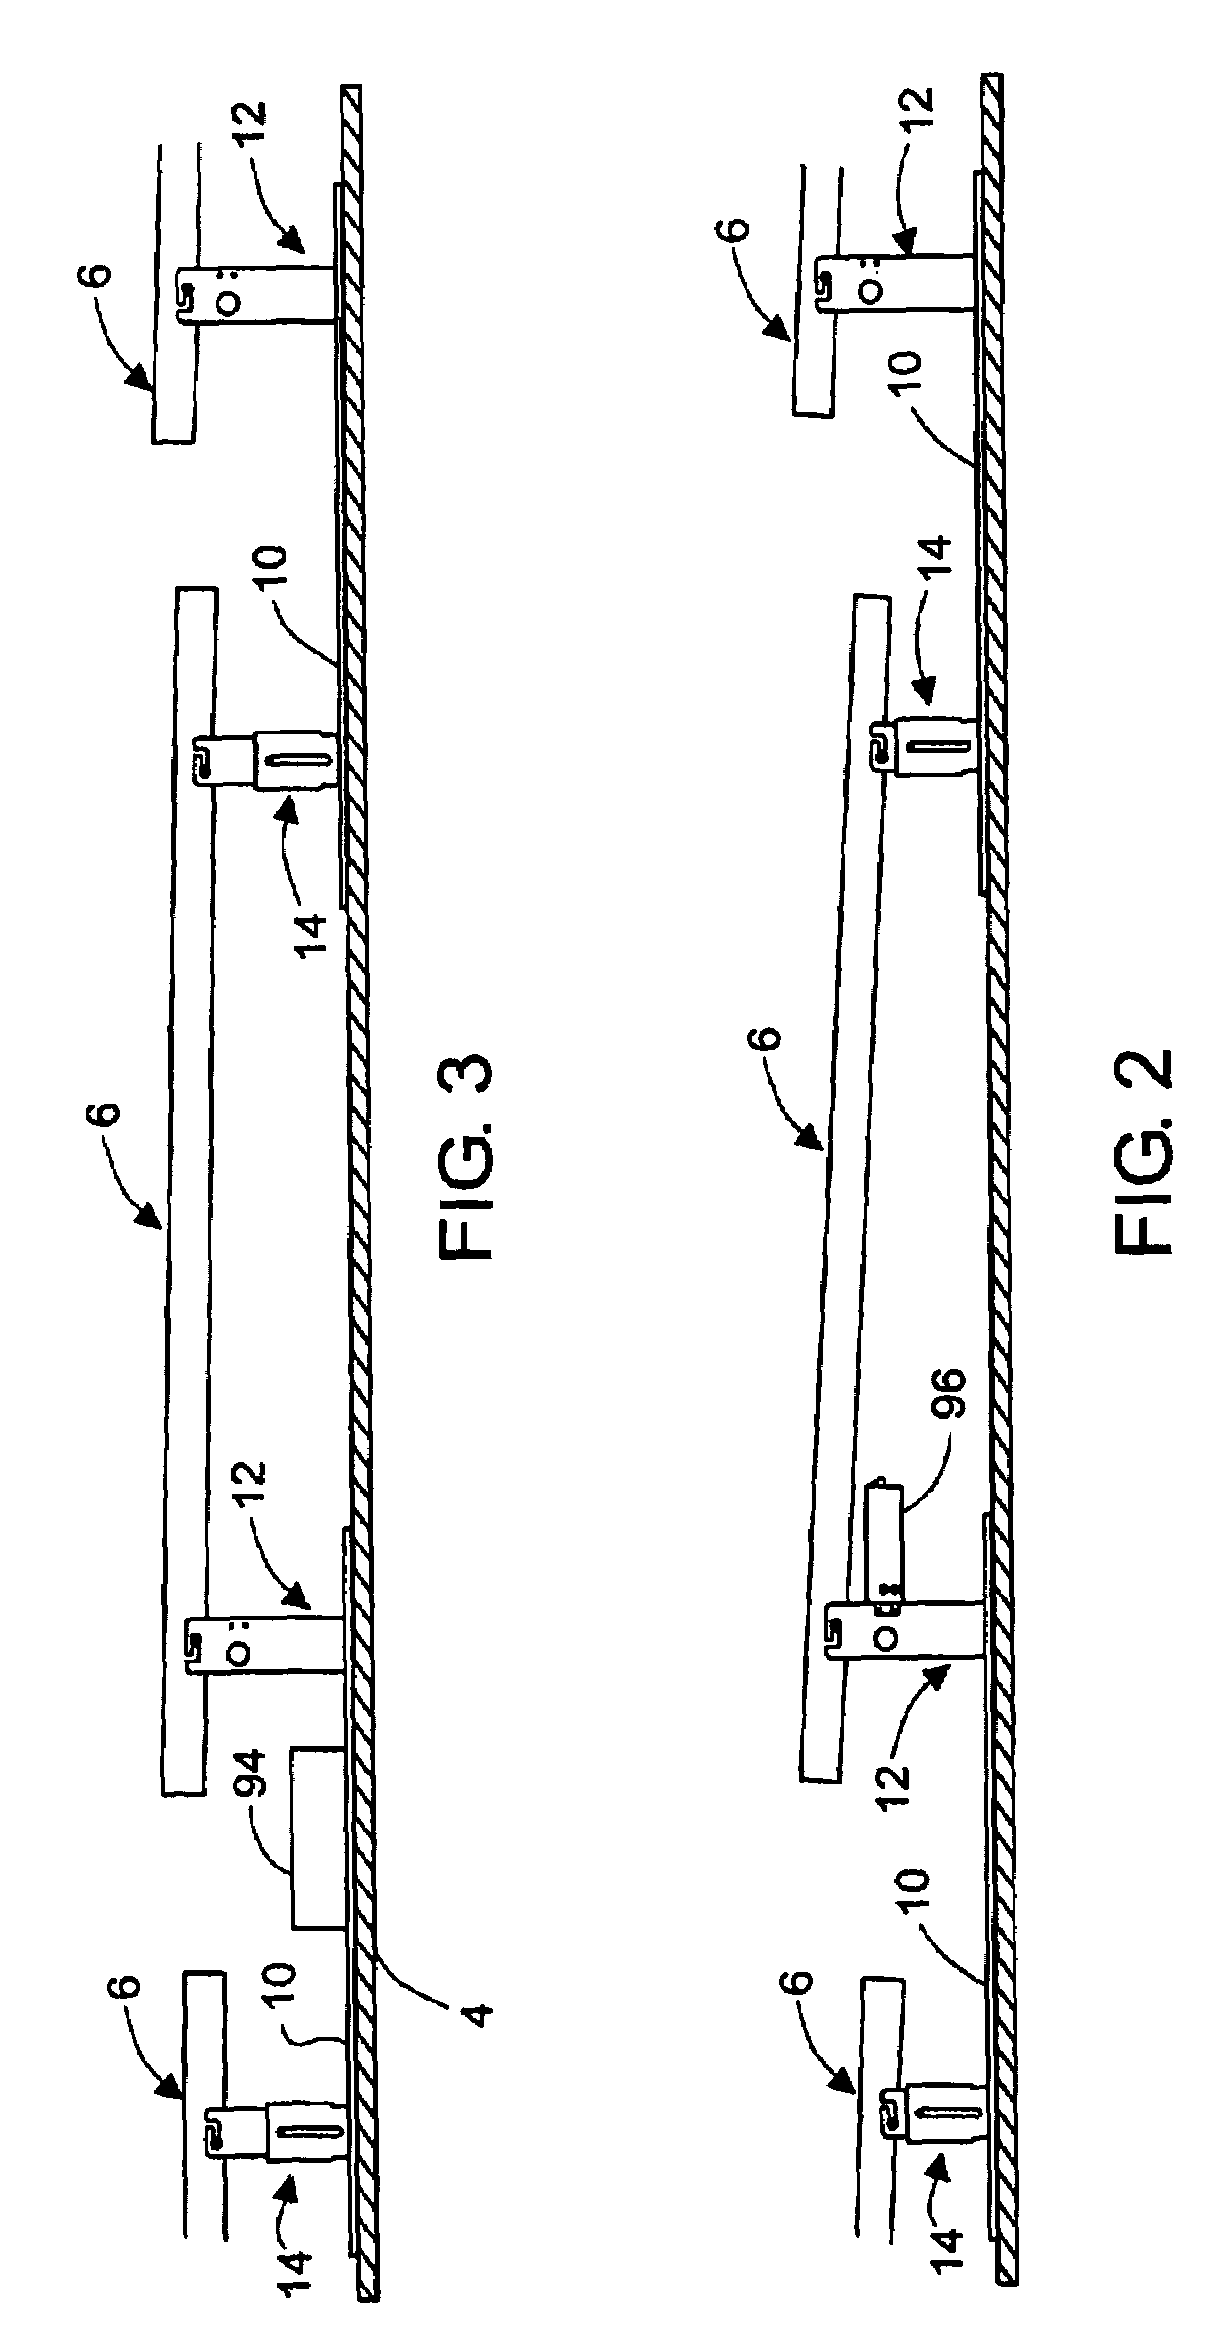 Apparatus and method for mounting photovoltaic power generating systems on buildings